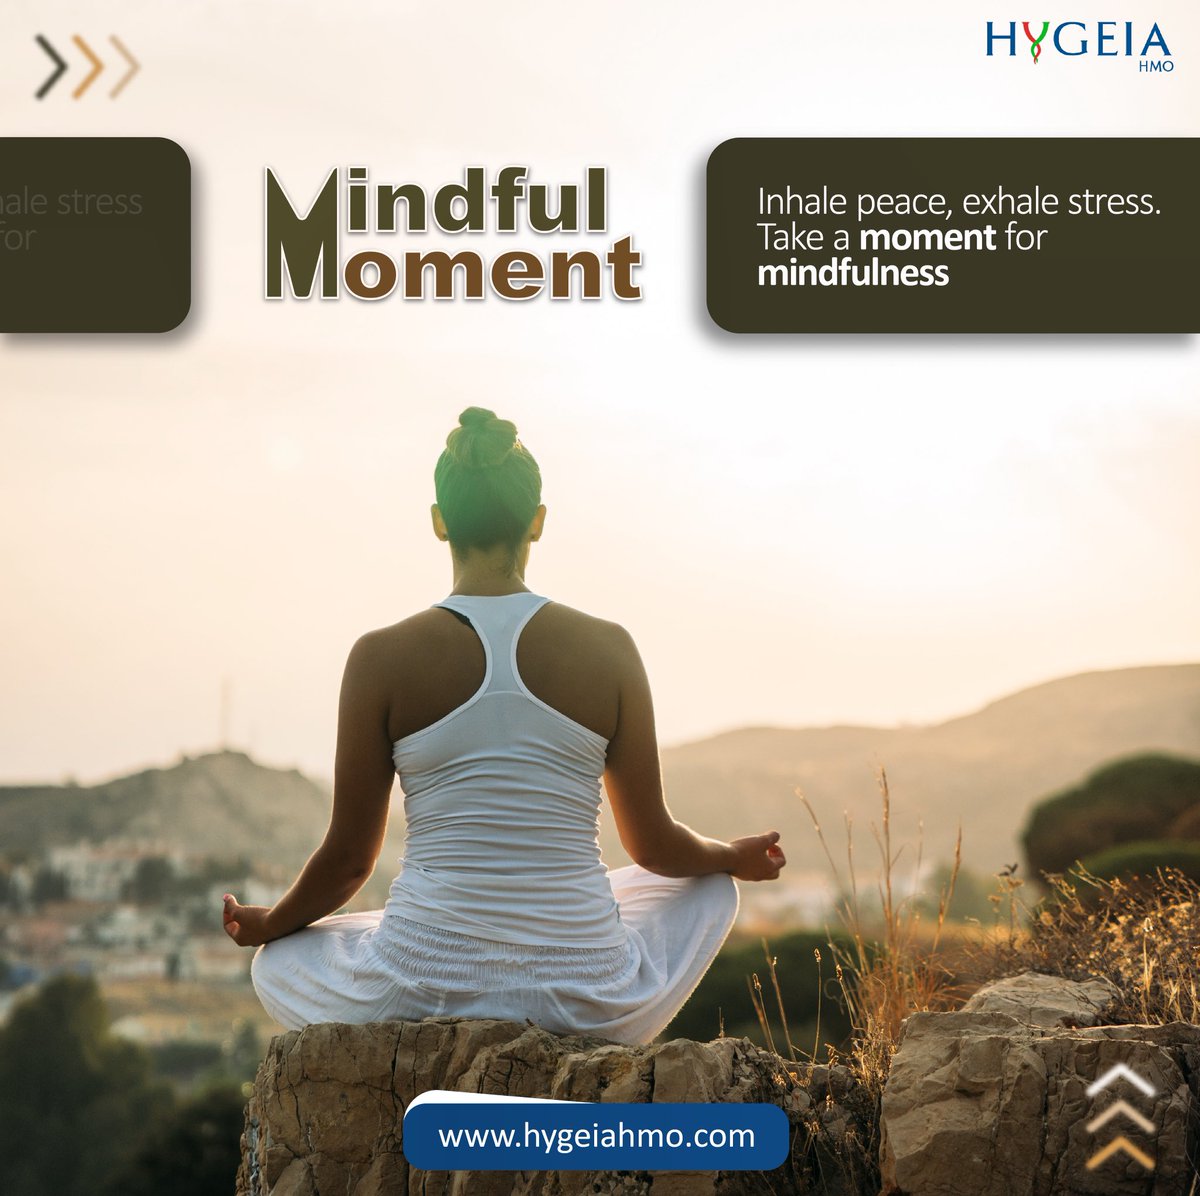 This is one way you can be present in the moment and nurture your well-being.

What do you do to register mindfulness in your life? Tell us in the comment section.
#Mindfulness #SelfCare #HygeiaHMO
hygeiahmo.com